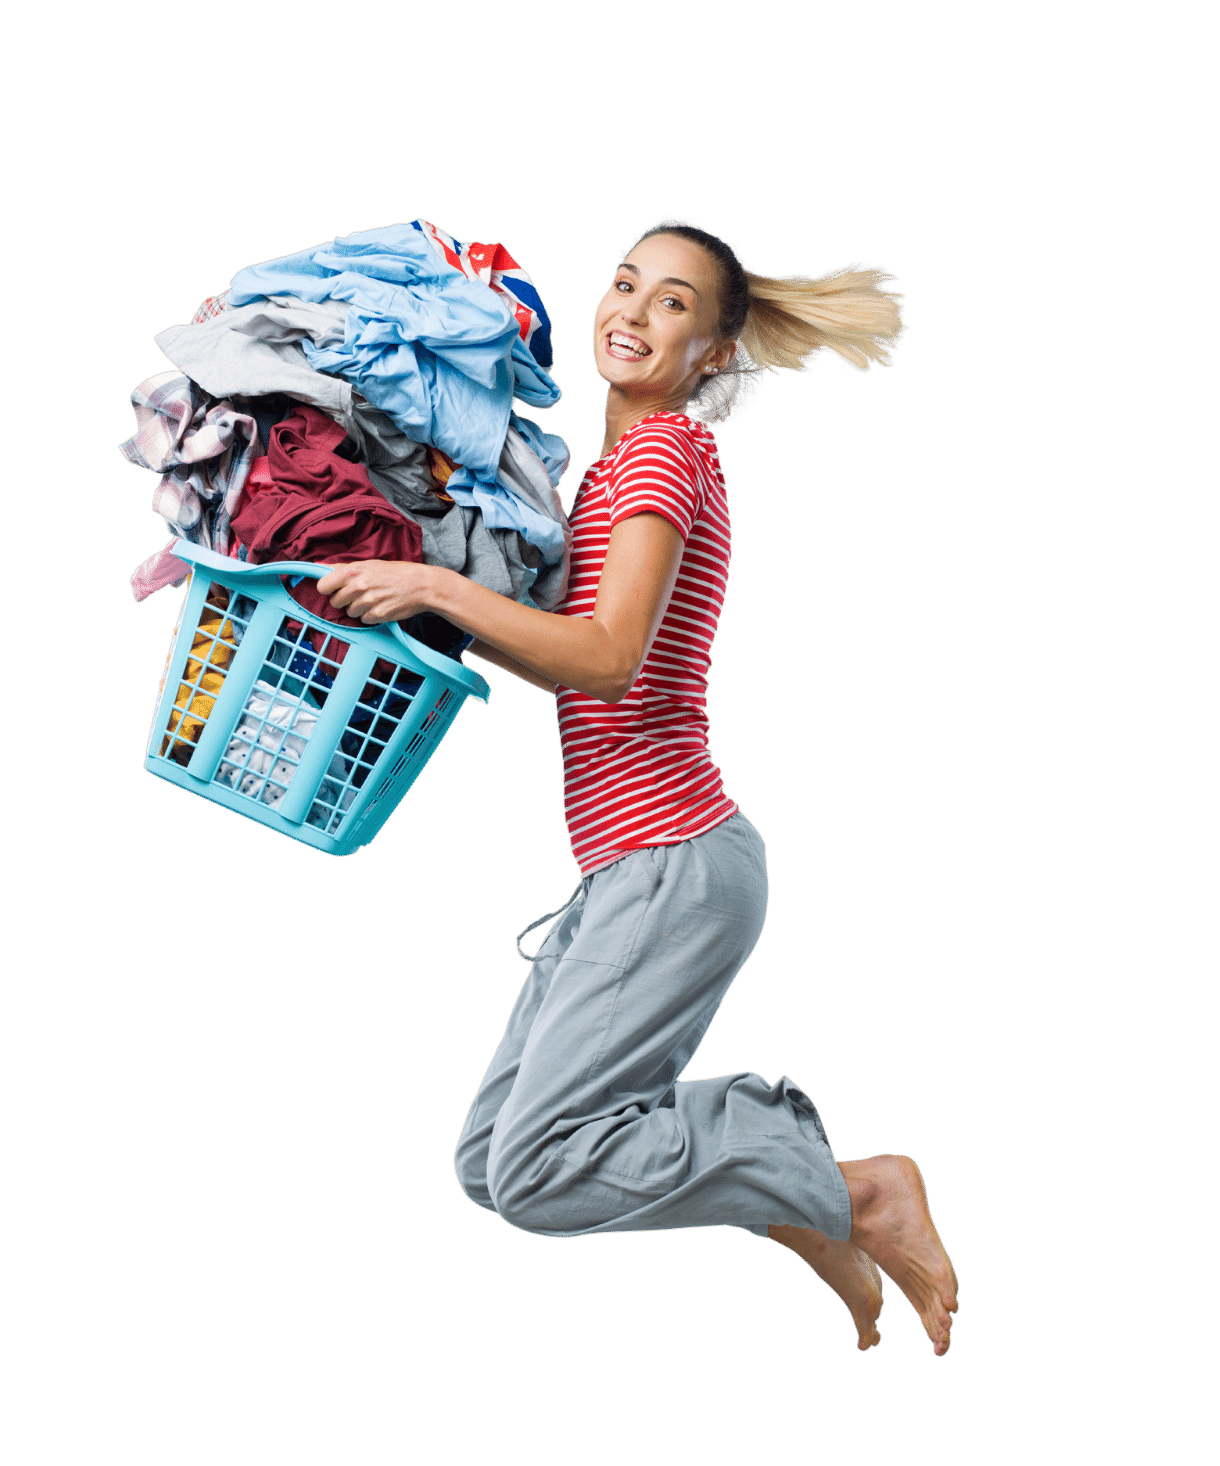 Woman in pajamas with laundry basket jumping in the air smiling